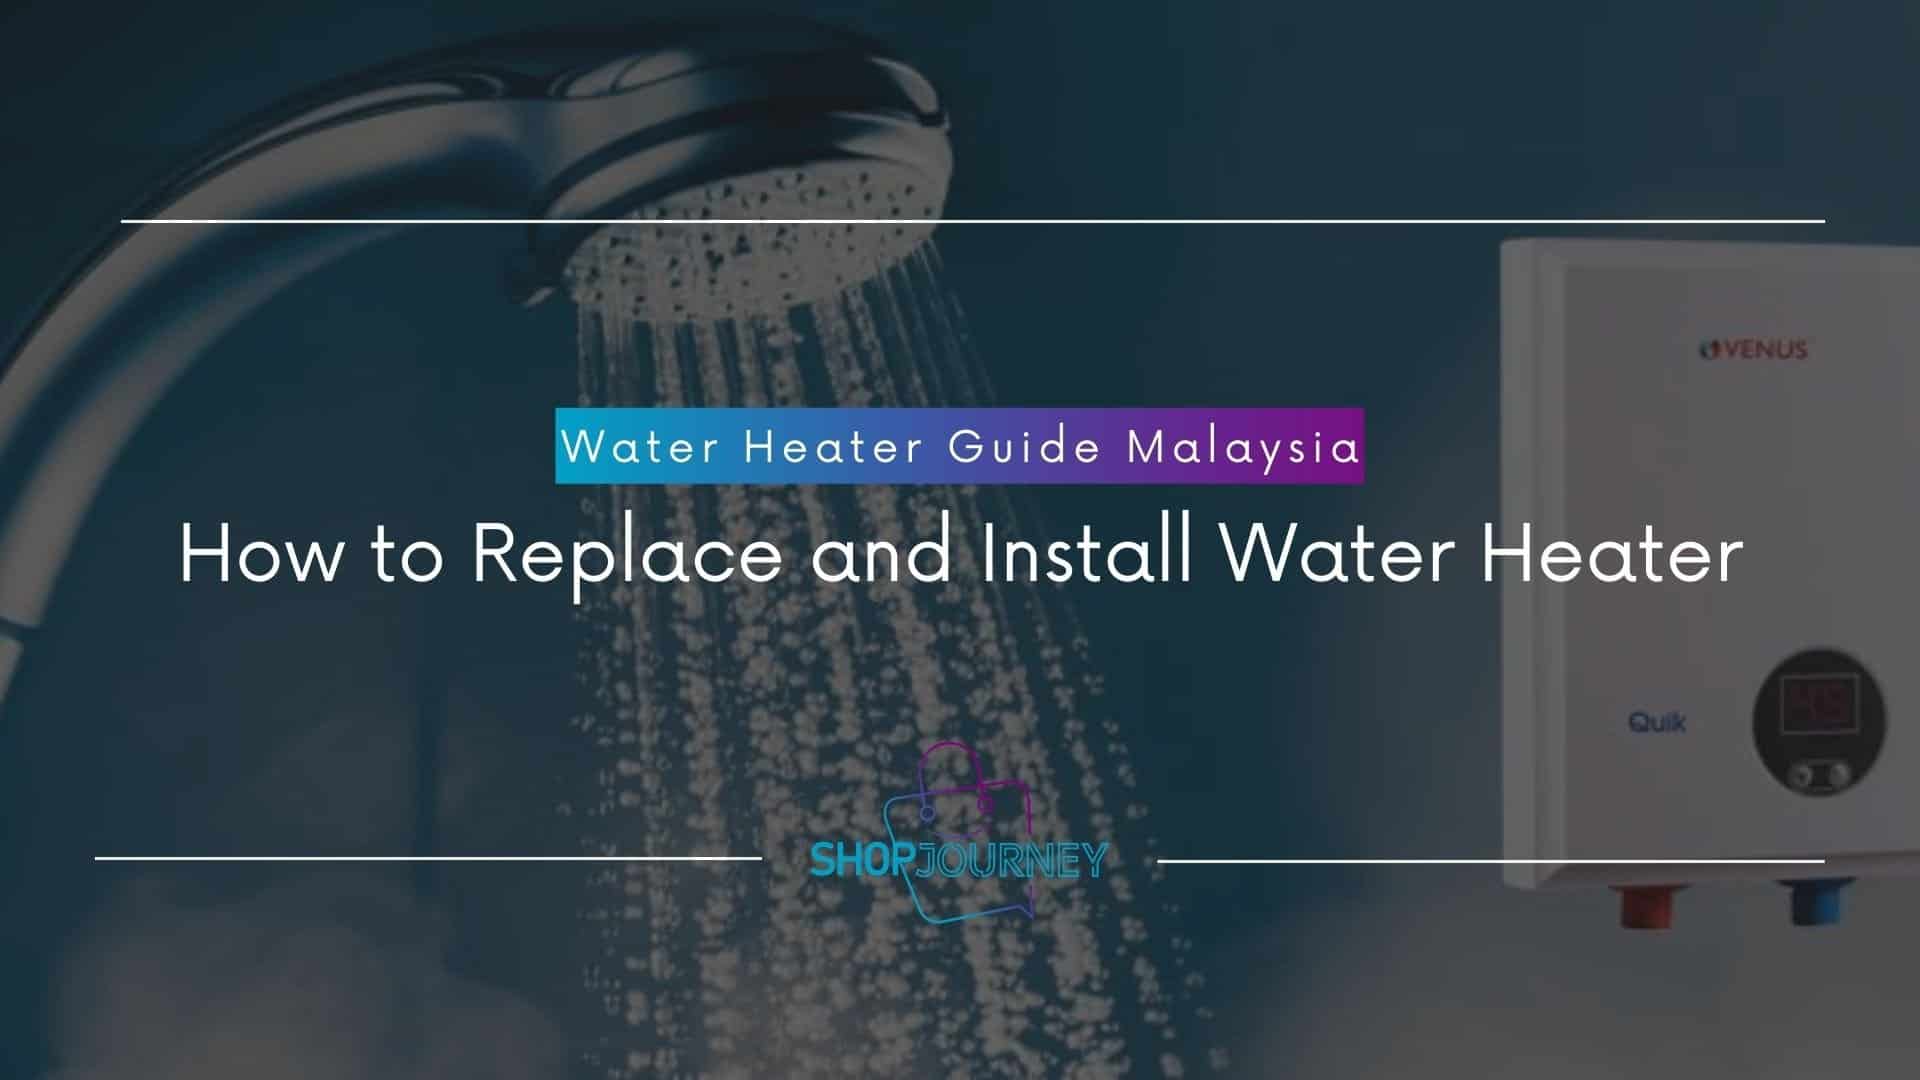 Water heater installation guide Malaysia.